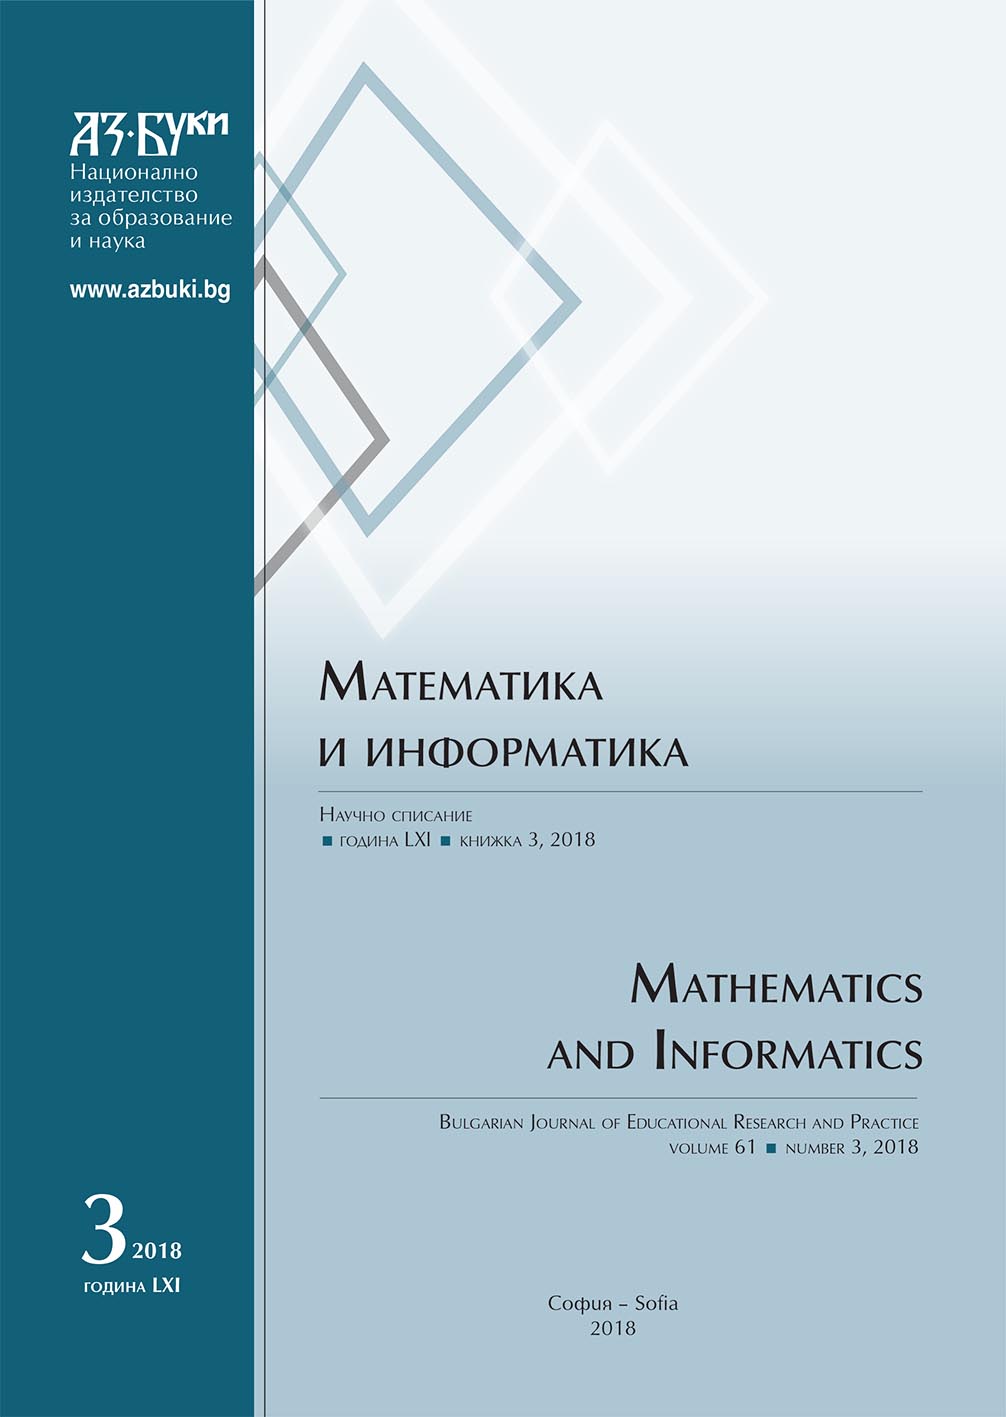 Polynomials of Third Degree with Collinear Roots Cover Image